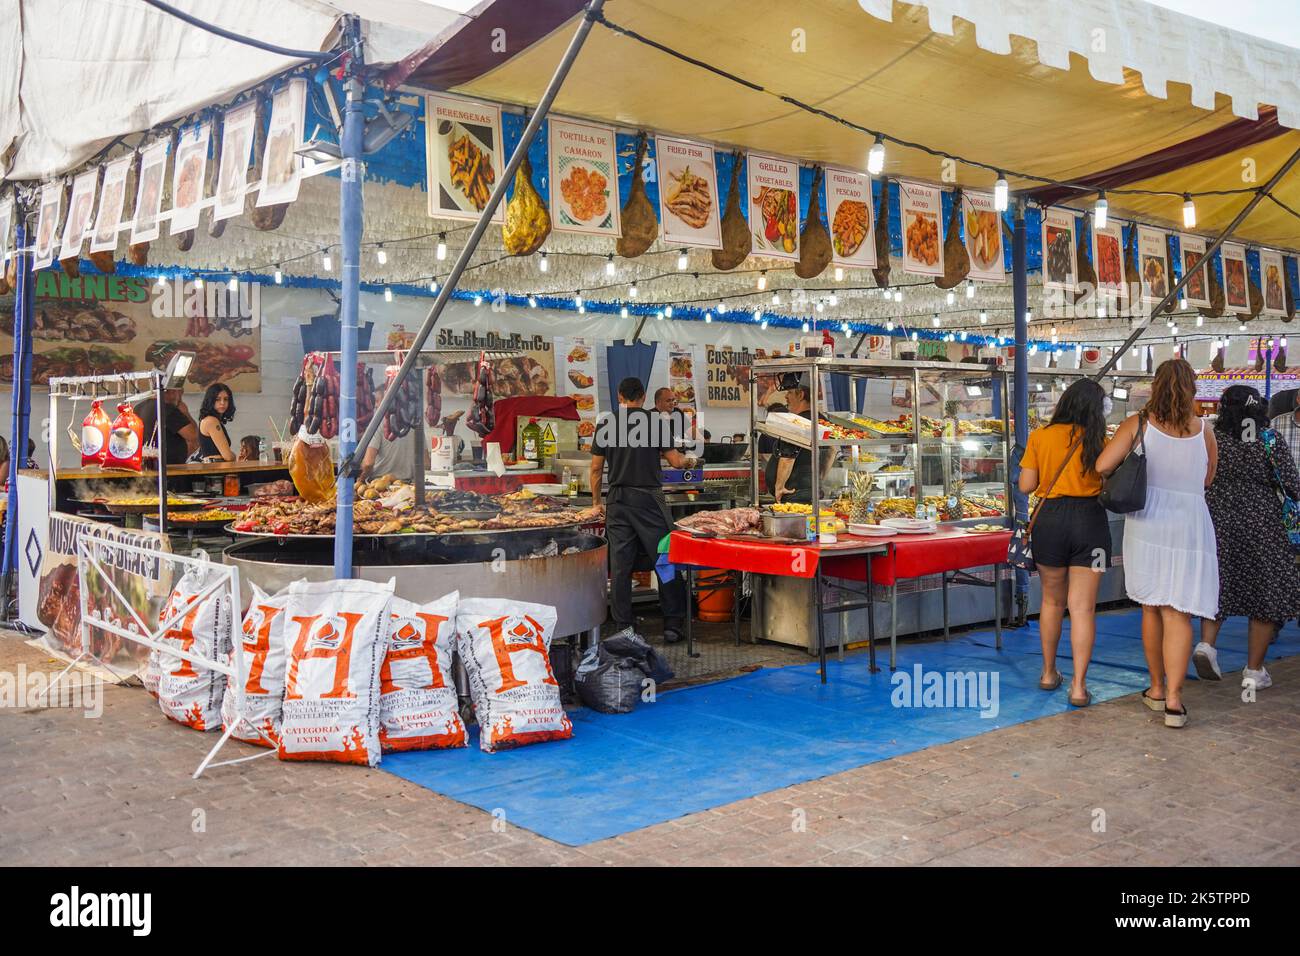 Food stand meat, at annual celebration of the festive Feria in Fuengirola, Costa del Sol, Spain. Stock Photo